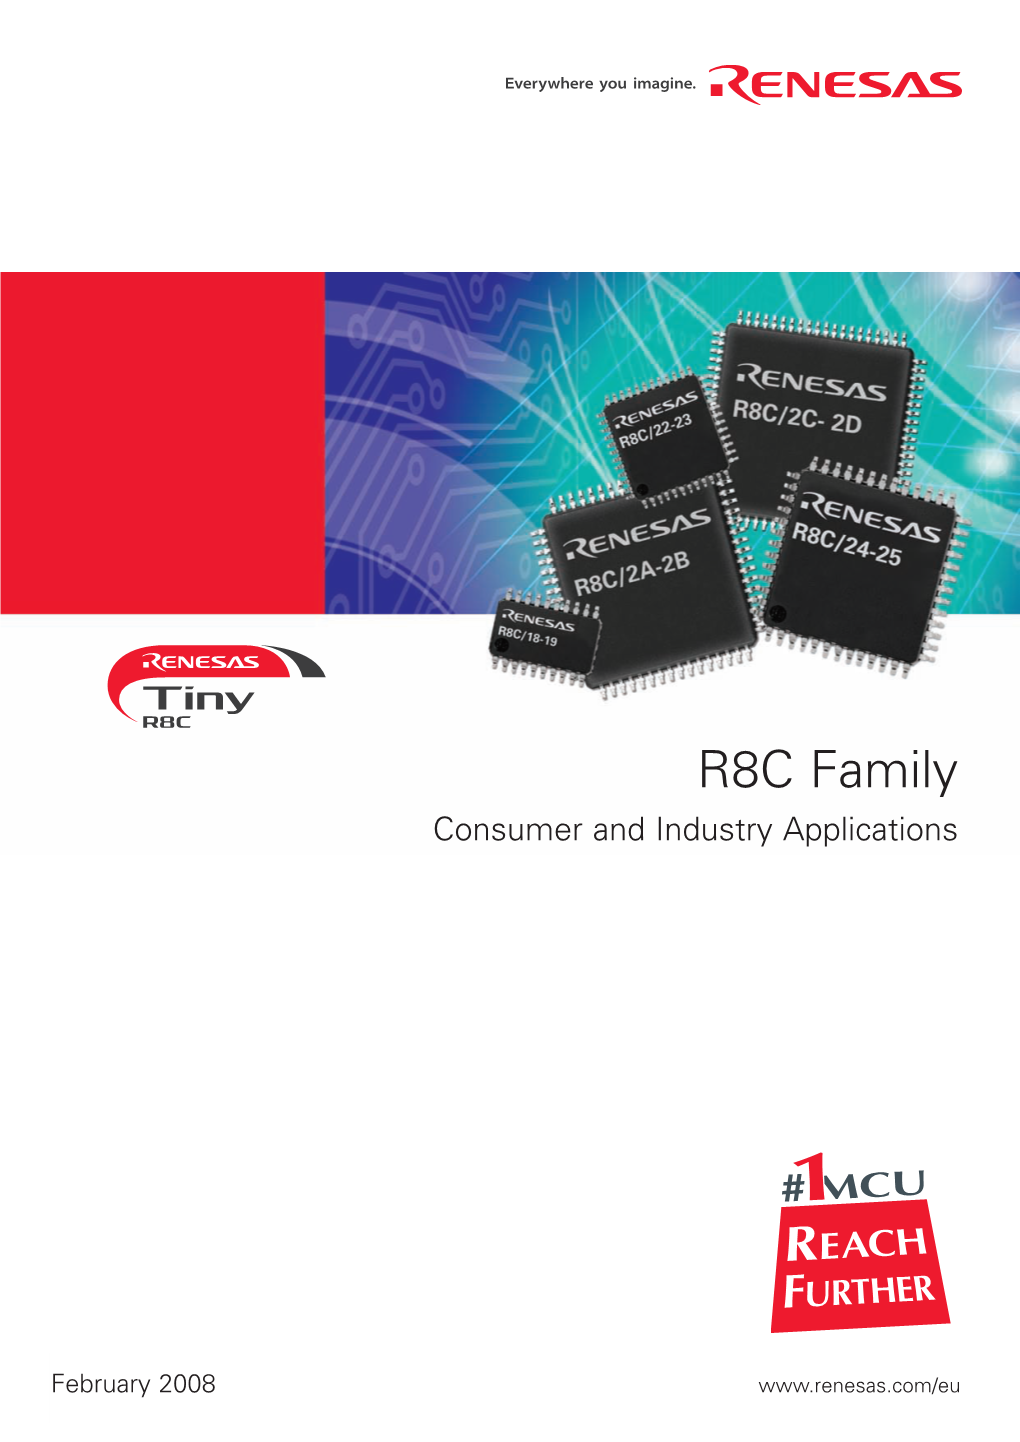 R8C Family Consumer and Industry Applications